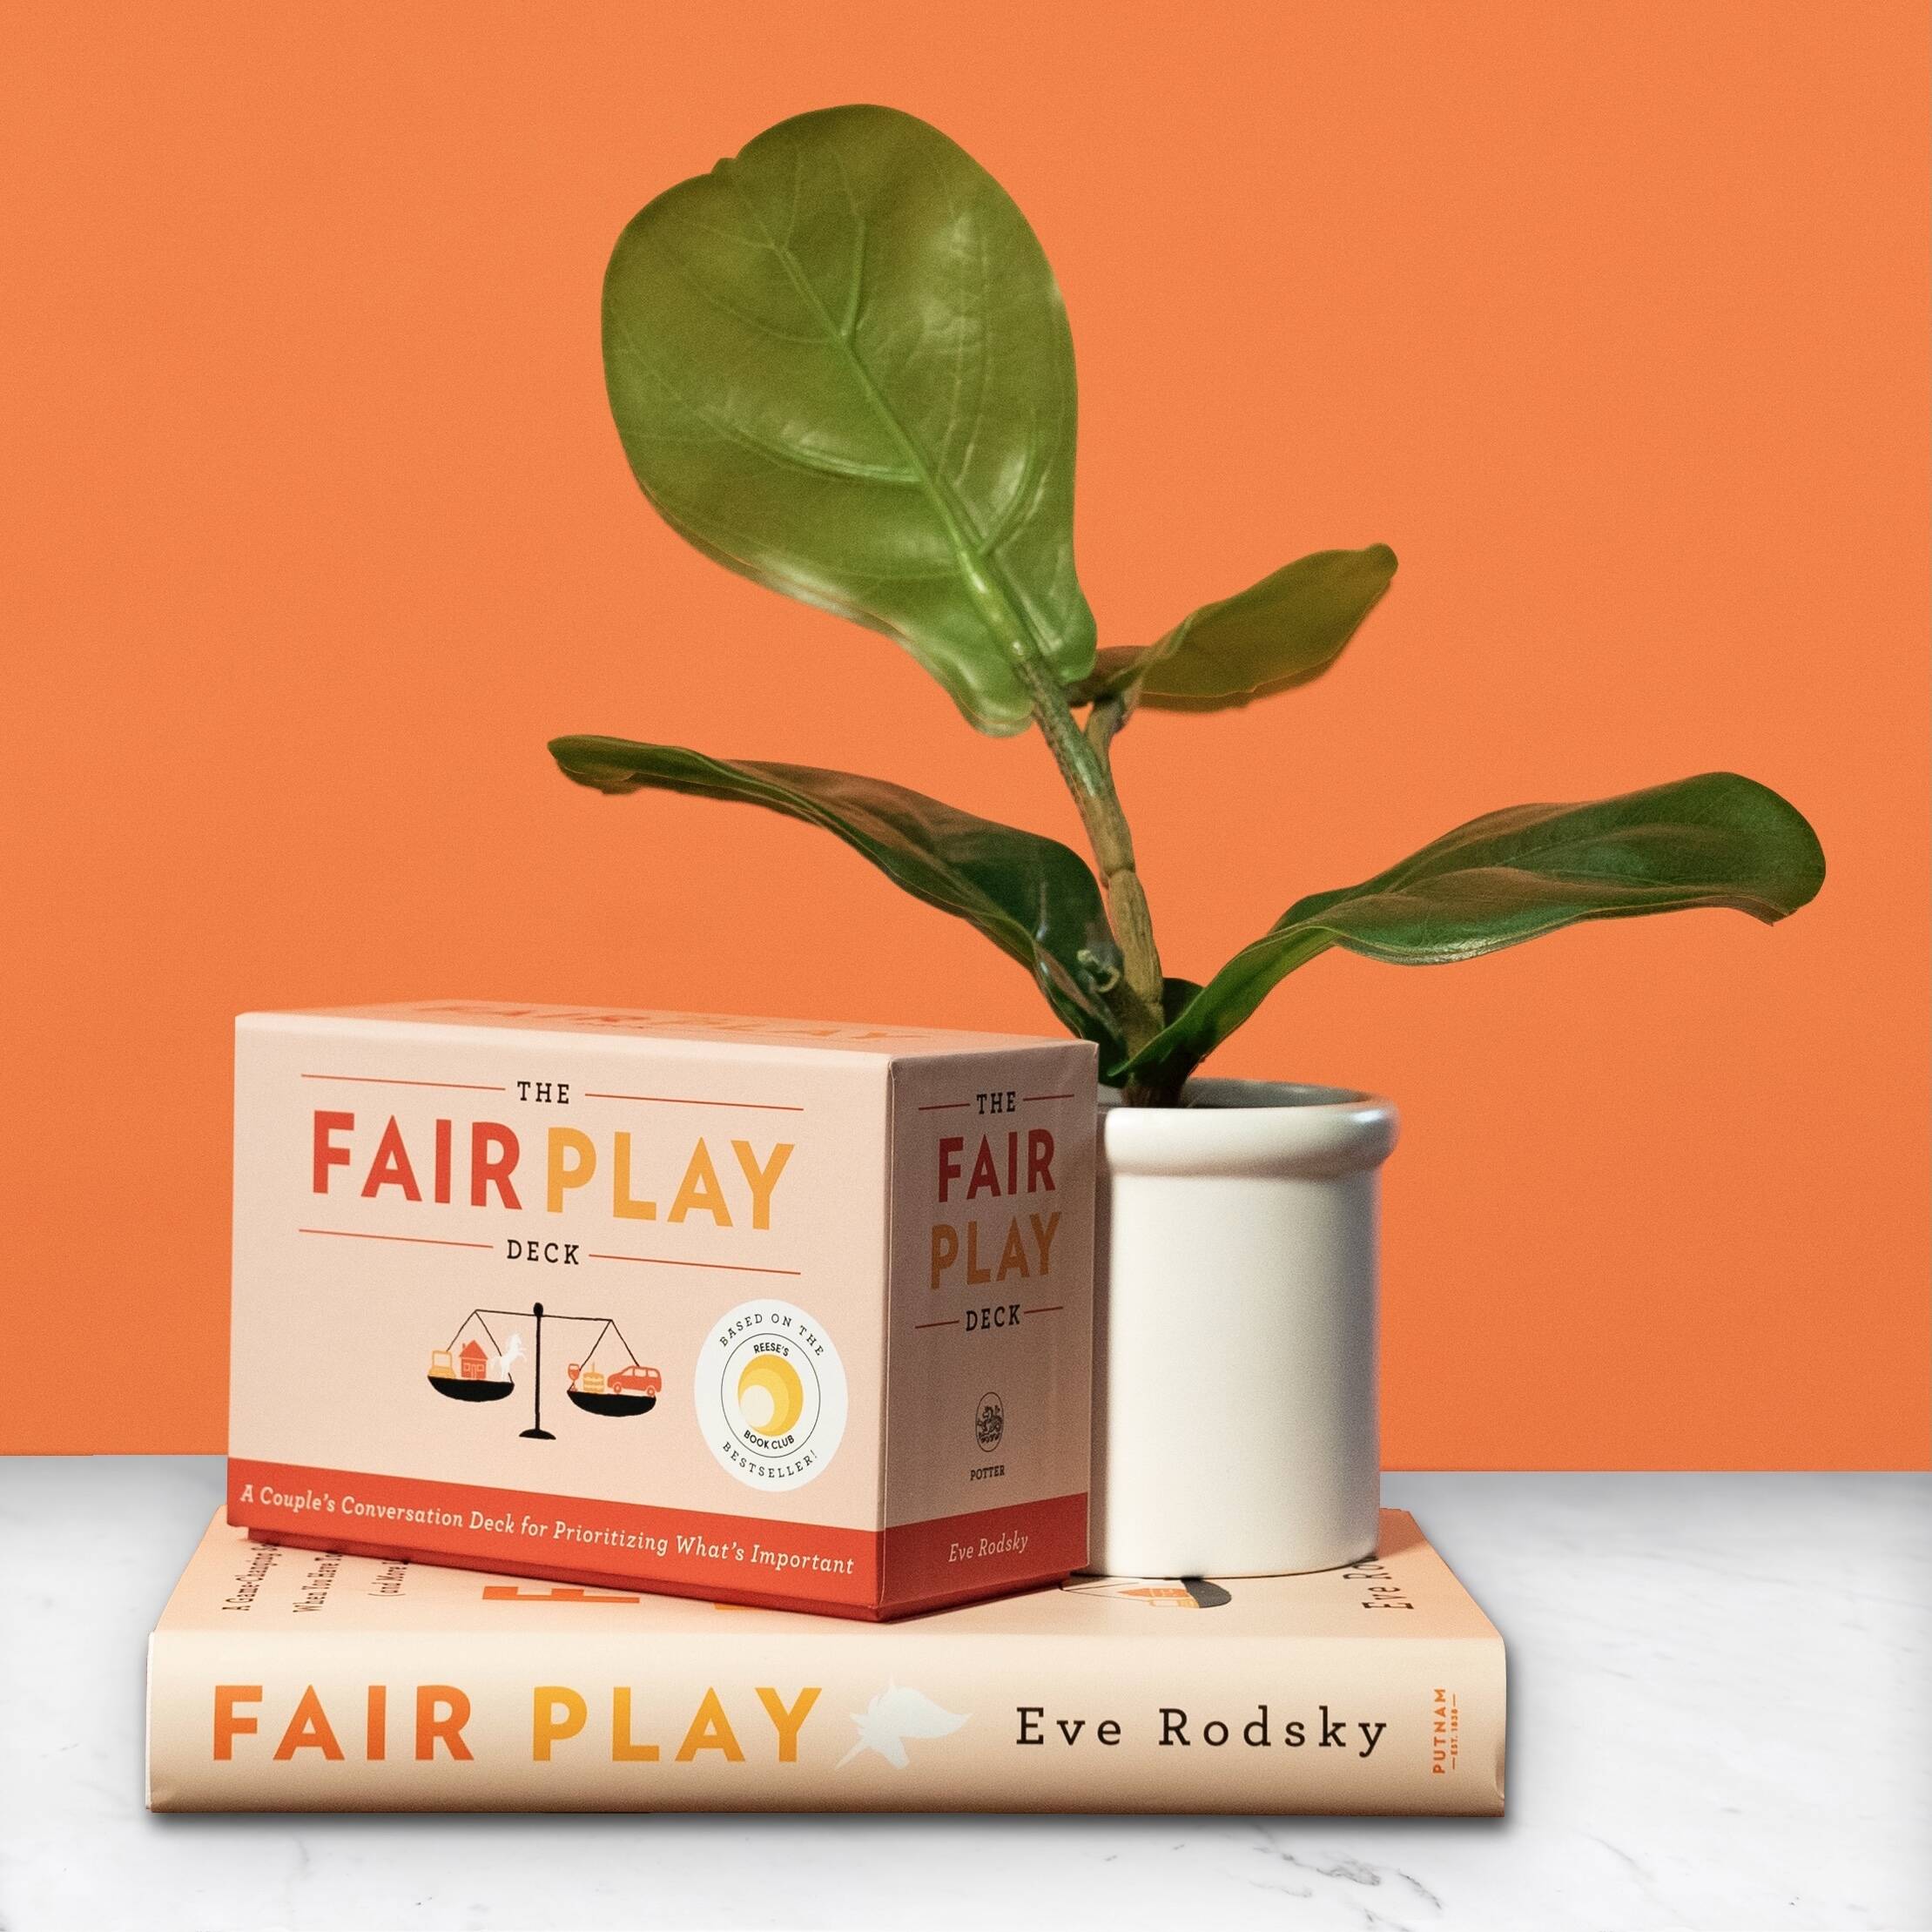 Eve Rodsky wrote the book &quot;Fair Play,&quot; which the card game is based on. (Courtesy of the Fair Play Policy Institute)